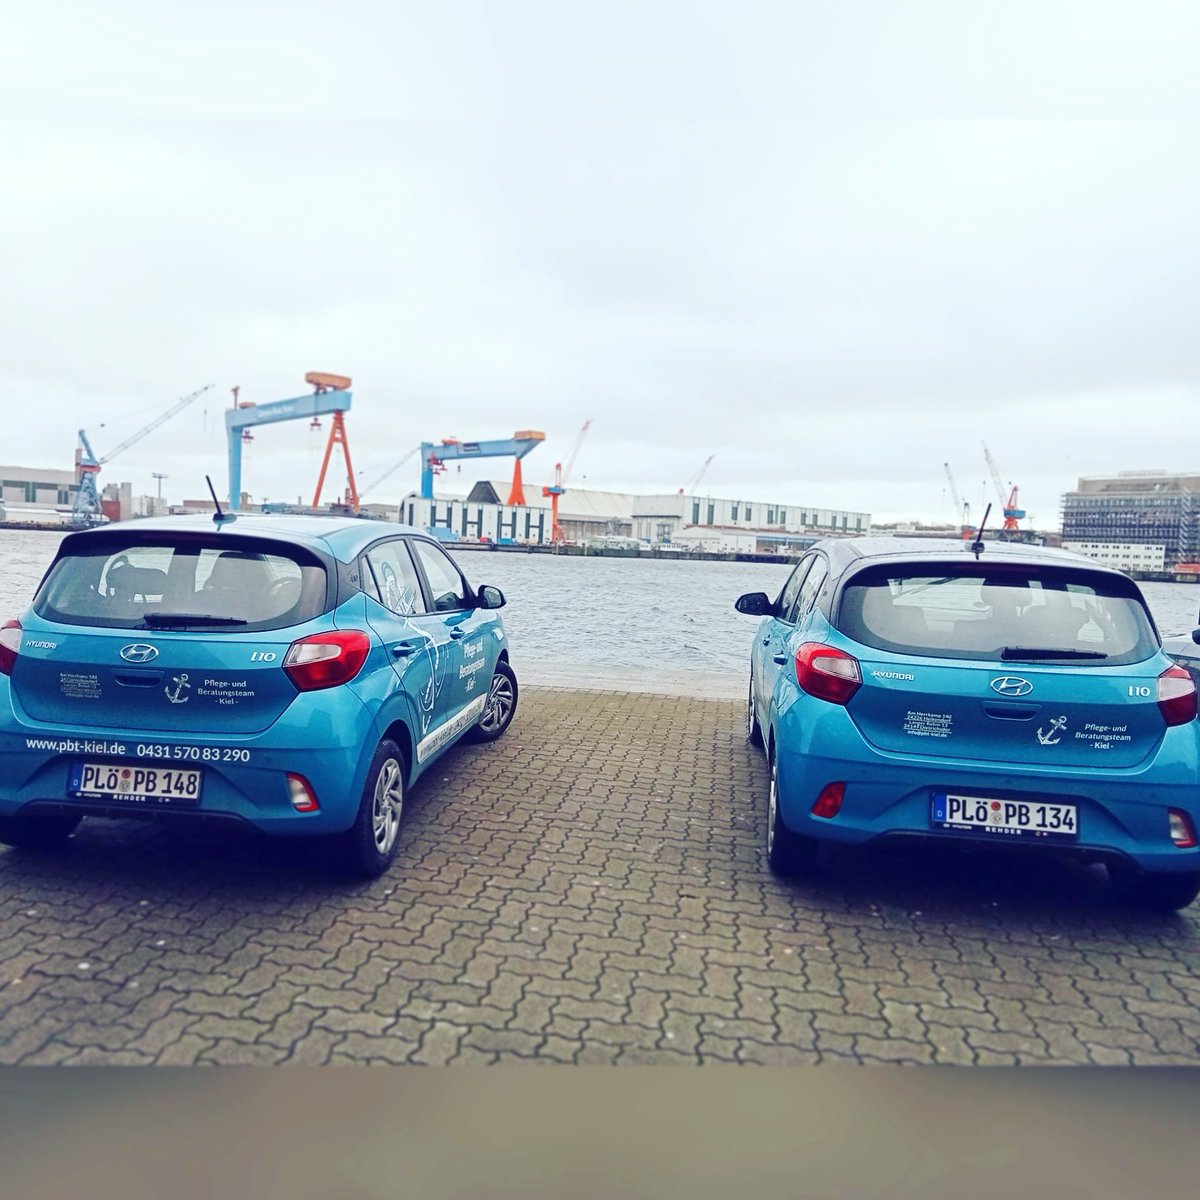 Photo of the day 12/365 📸❤️

The PBTK-cars from a friend and me at the Kiel-Harbour. ❤️

#photo #photooftheday #photography #caretaker #pbtk #kiel #cars #harbour #pflege